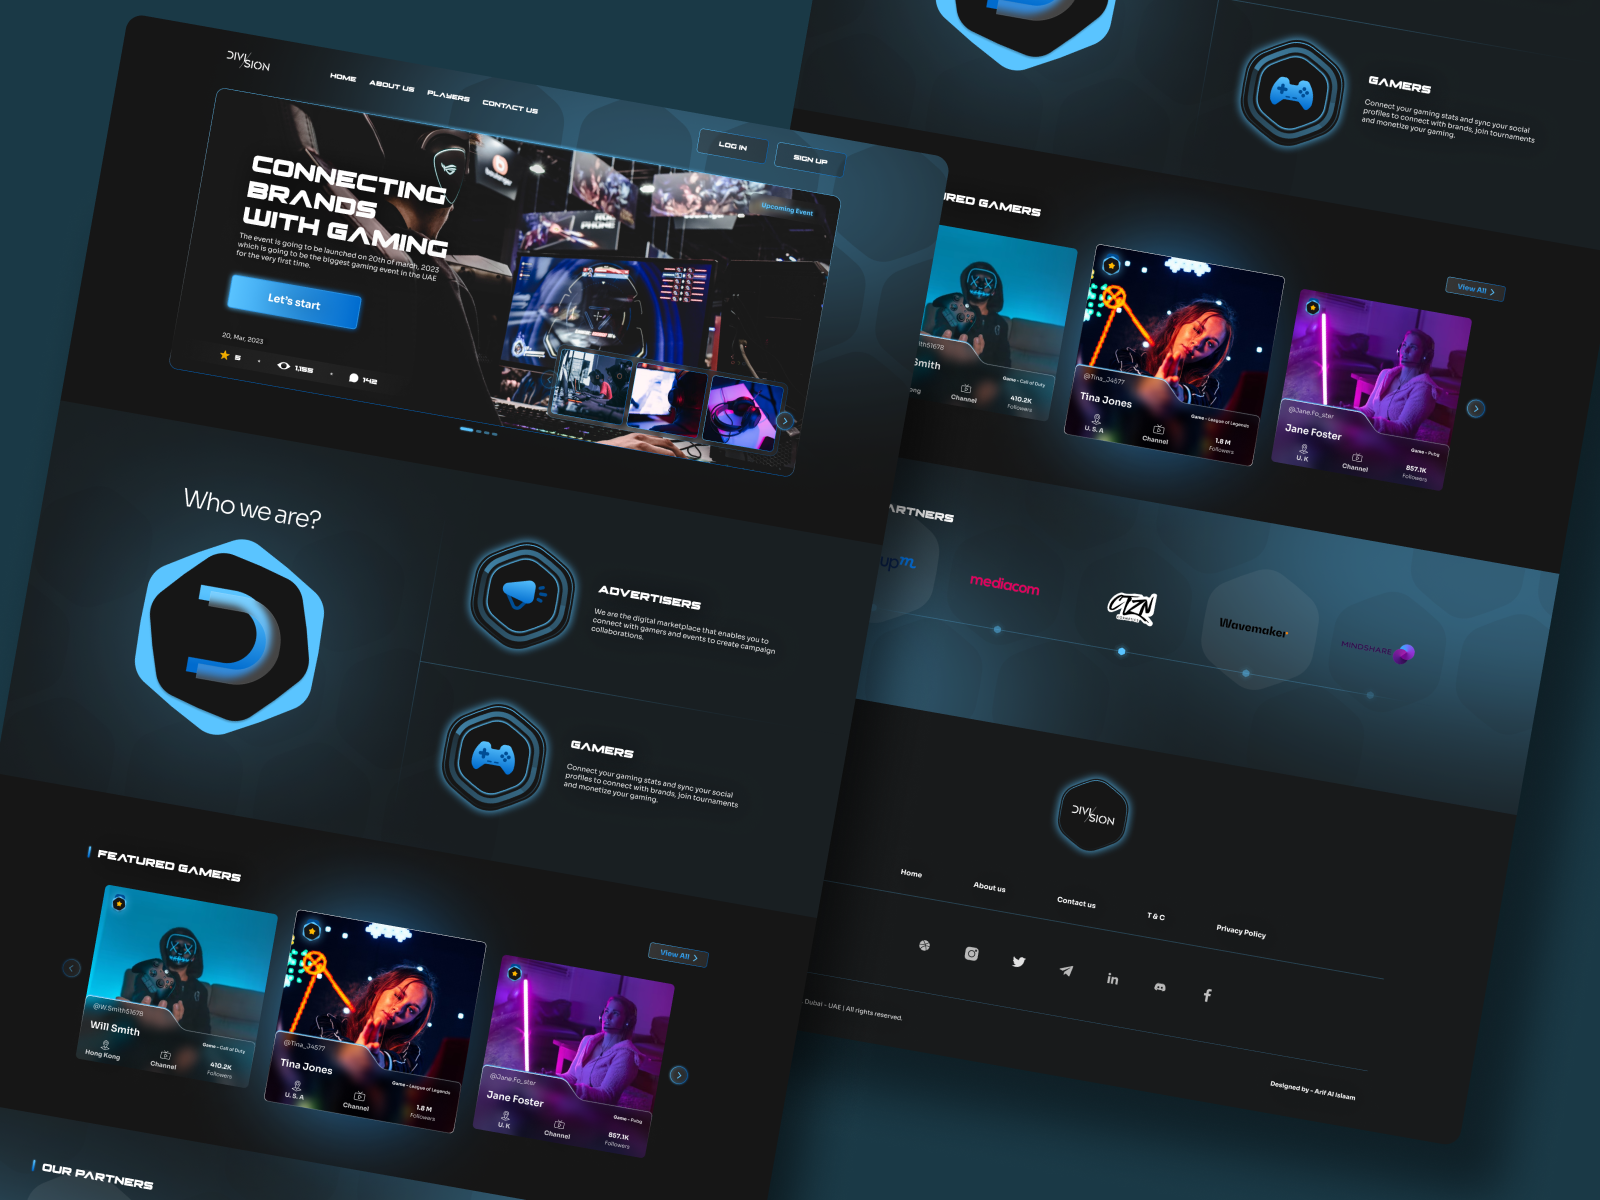 Gaming Event - Web Interface by Arif Al Islam on Dribbble